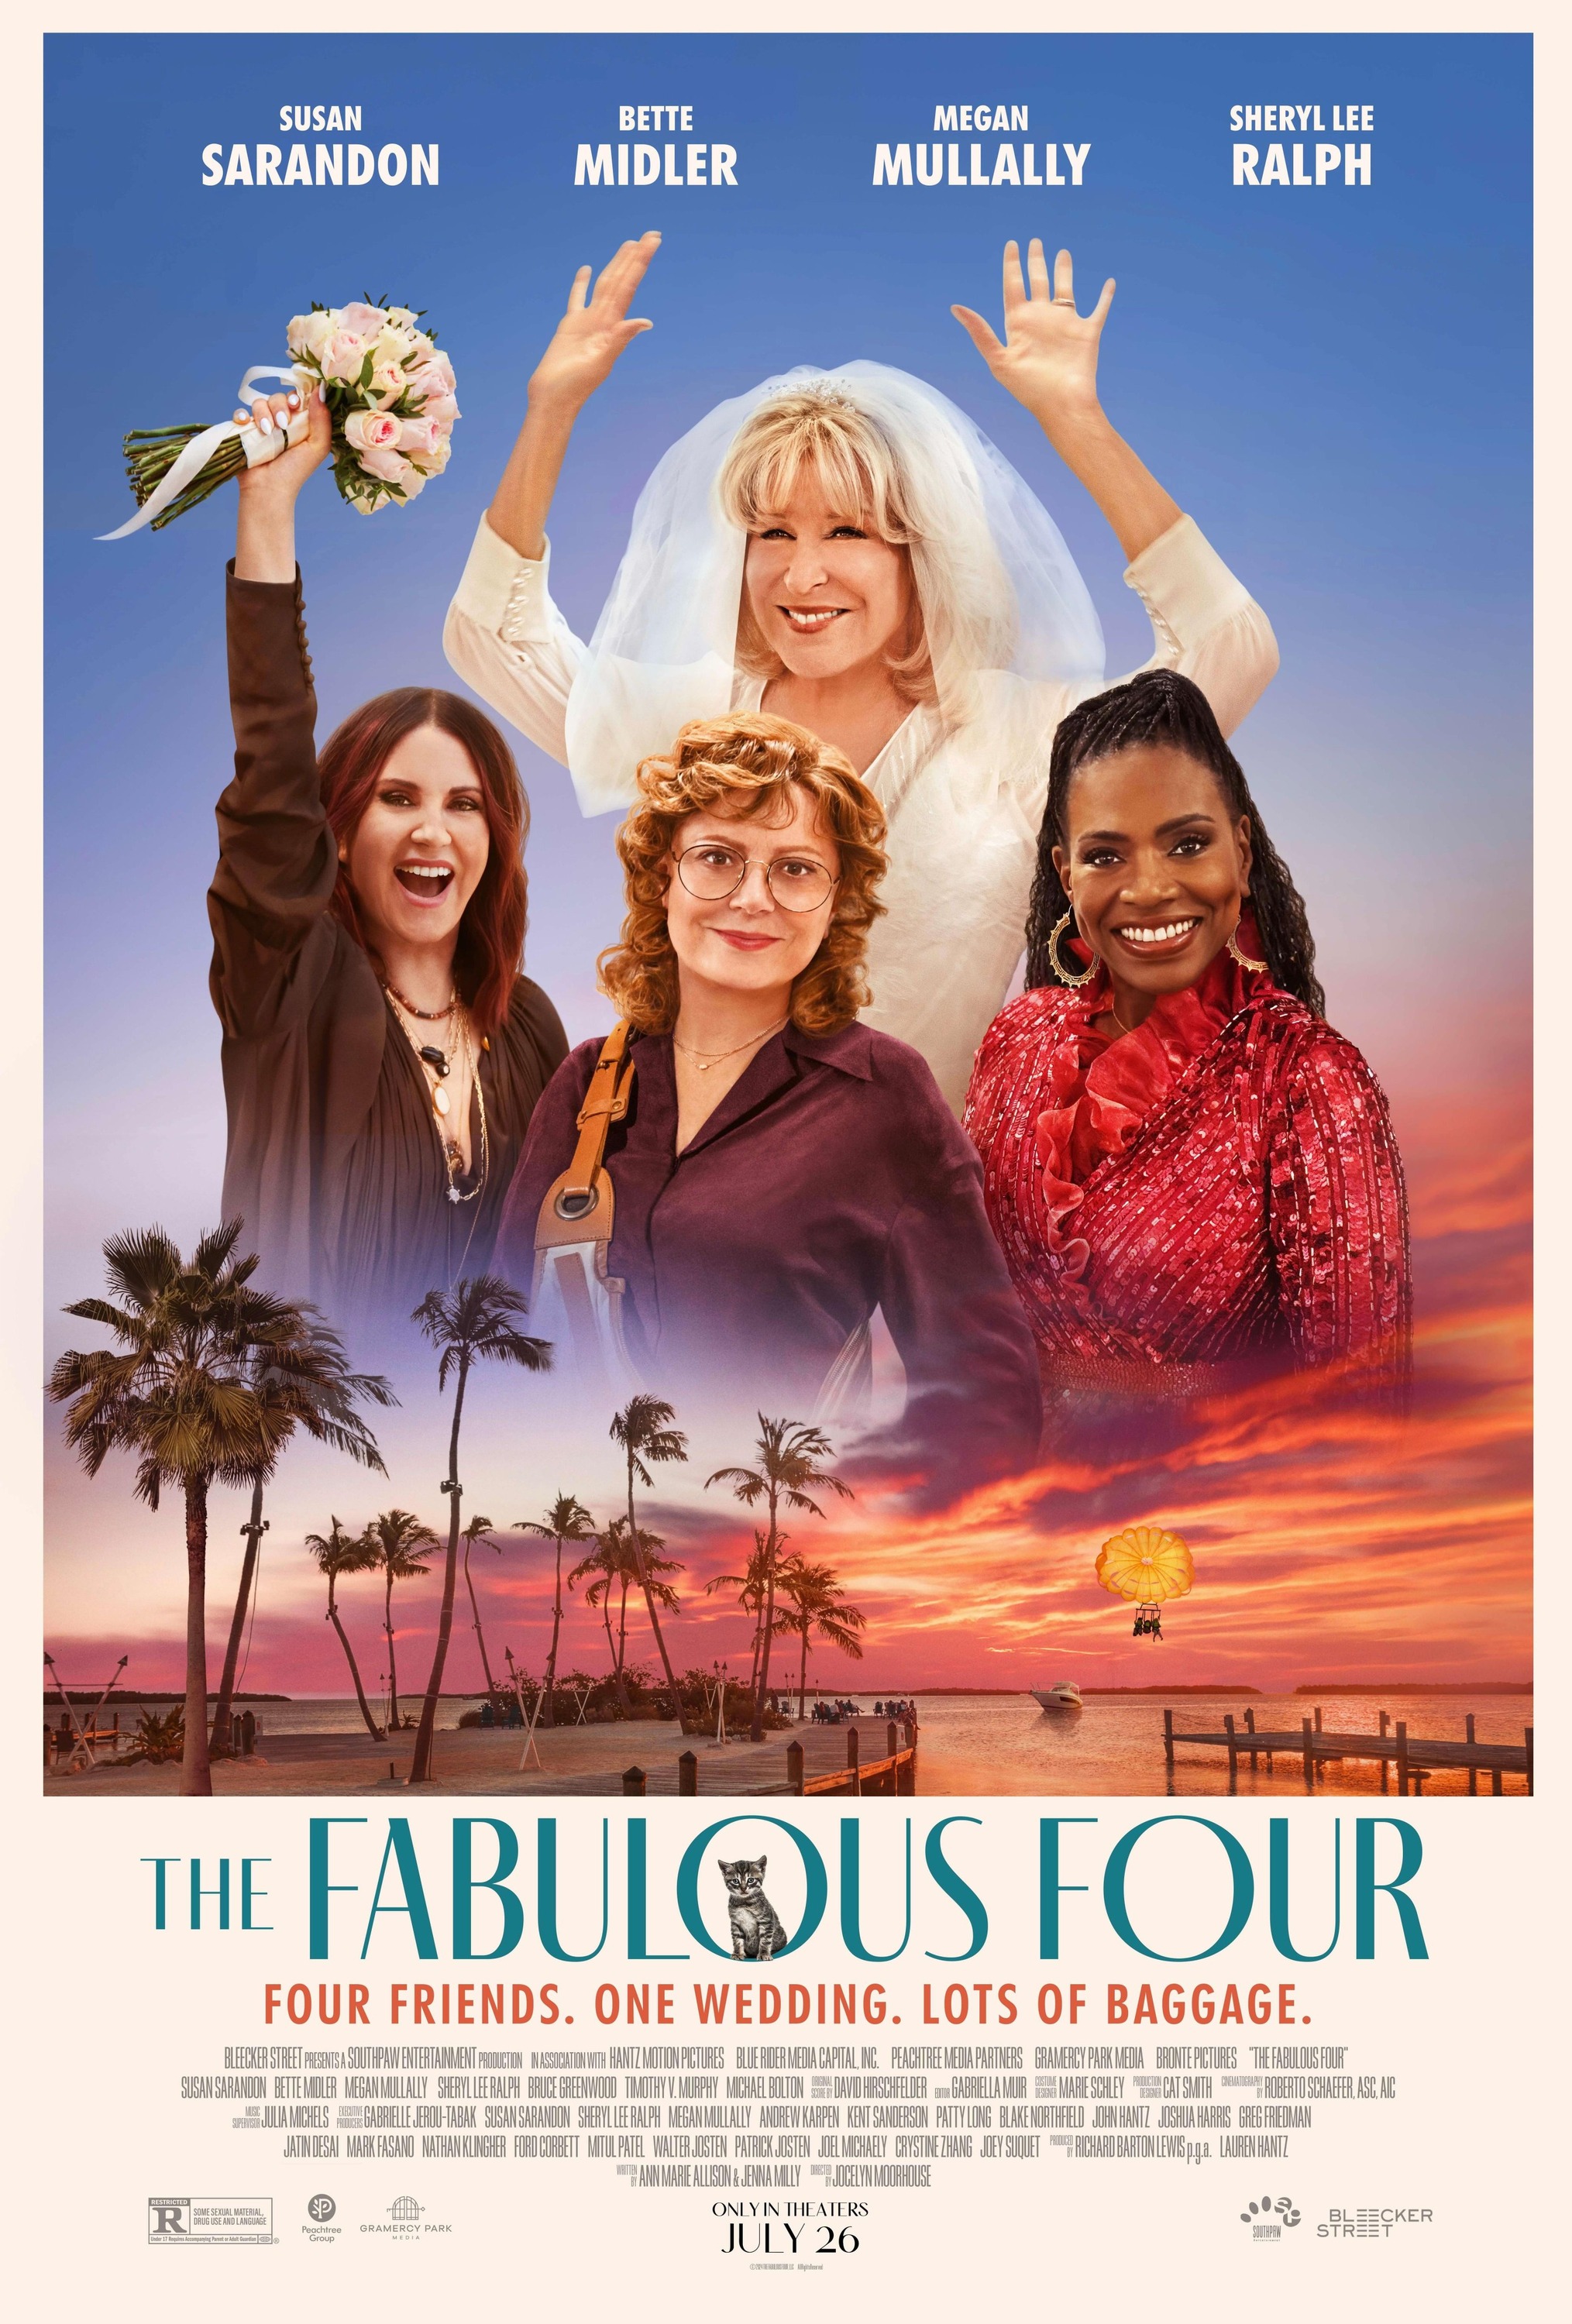 Mega Sized Movie Poster Image for The Fabulous Four 